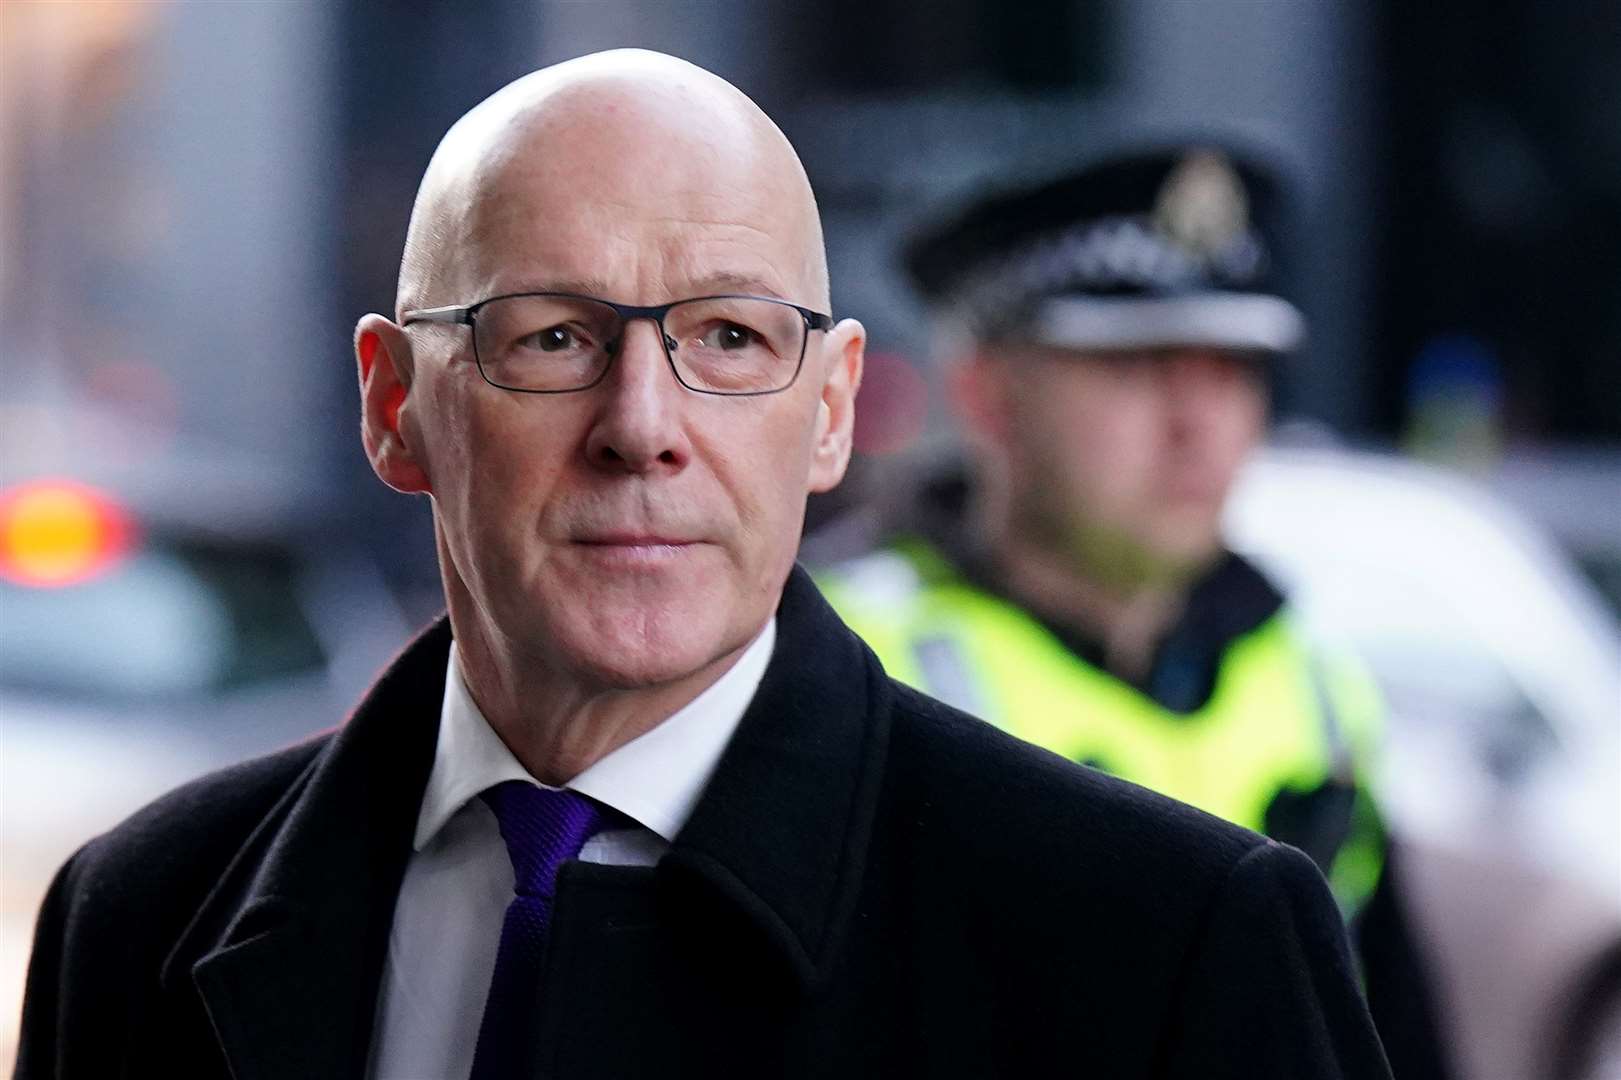 John Swinney told the inquiry he ‘manually’ deleted messages (Jane Barlow/PA)